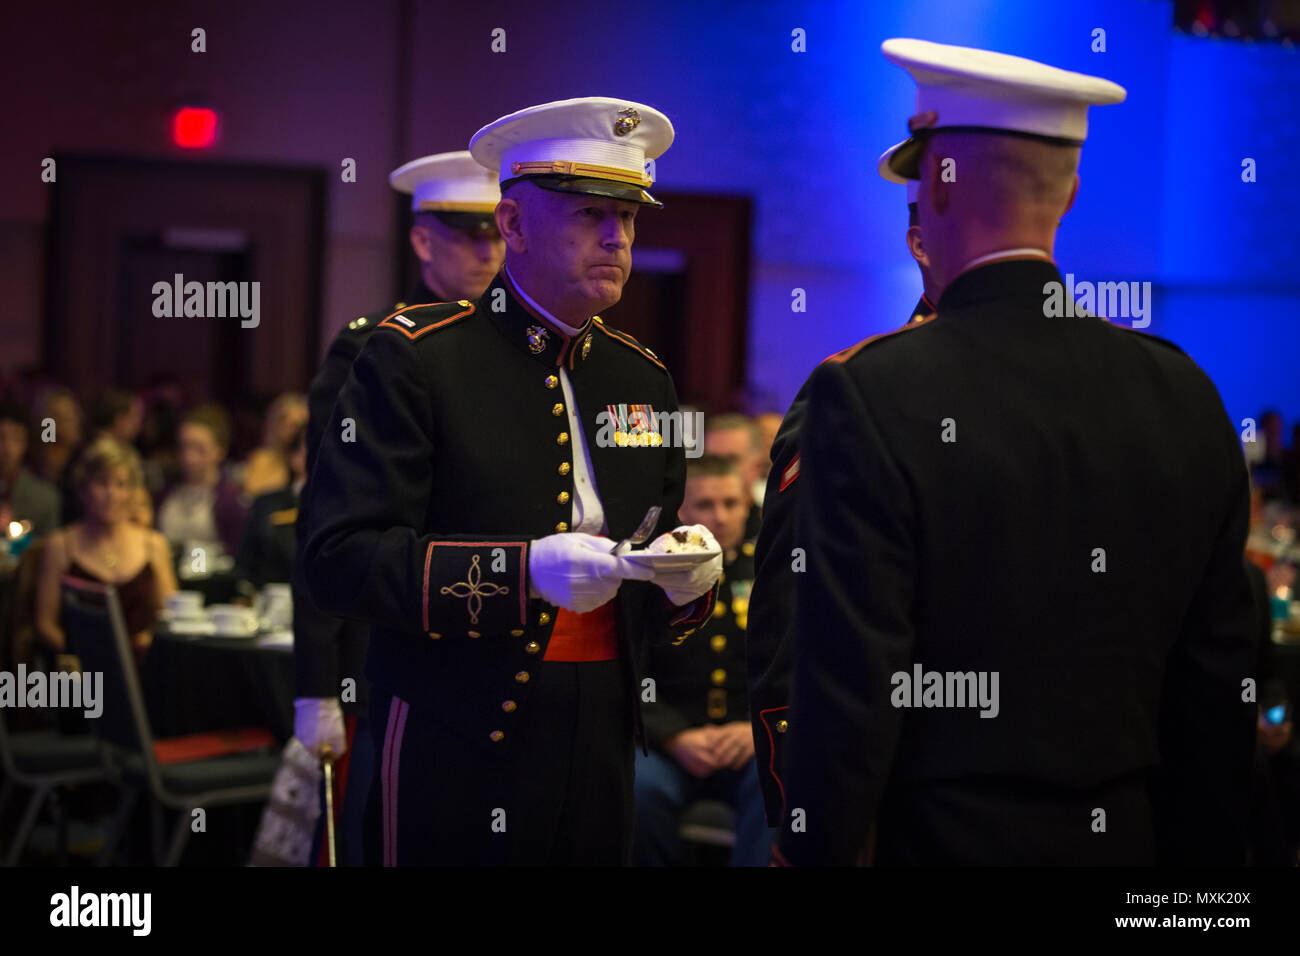 U.S. Marine Corps Chief Warrant Officer 5 Michael W. Edmonson, head of Marine Corps Field Bands, Office of United States Marine Corps Communication, eats a piece of cake during he Headquarters & Service Battalion Marine Corps Ball, Renaissance Arlington Capitol View Hotel, Arlington, Va., Nov. 05, 2016. Edmonson was recognized as the oldest Marine present during the celebration of the Marine Corps’ 241st birthday. (U.S. Marine Corps photo by Pfc. Alex A. Quiles) Stock Photo